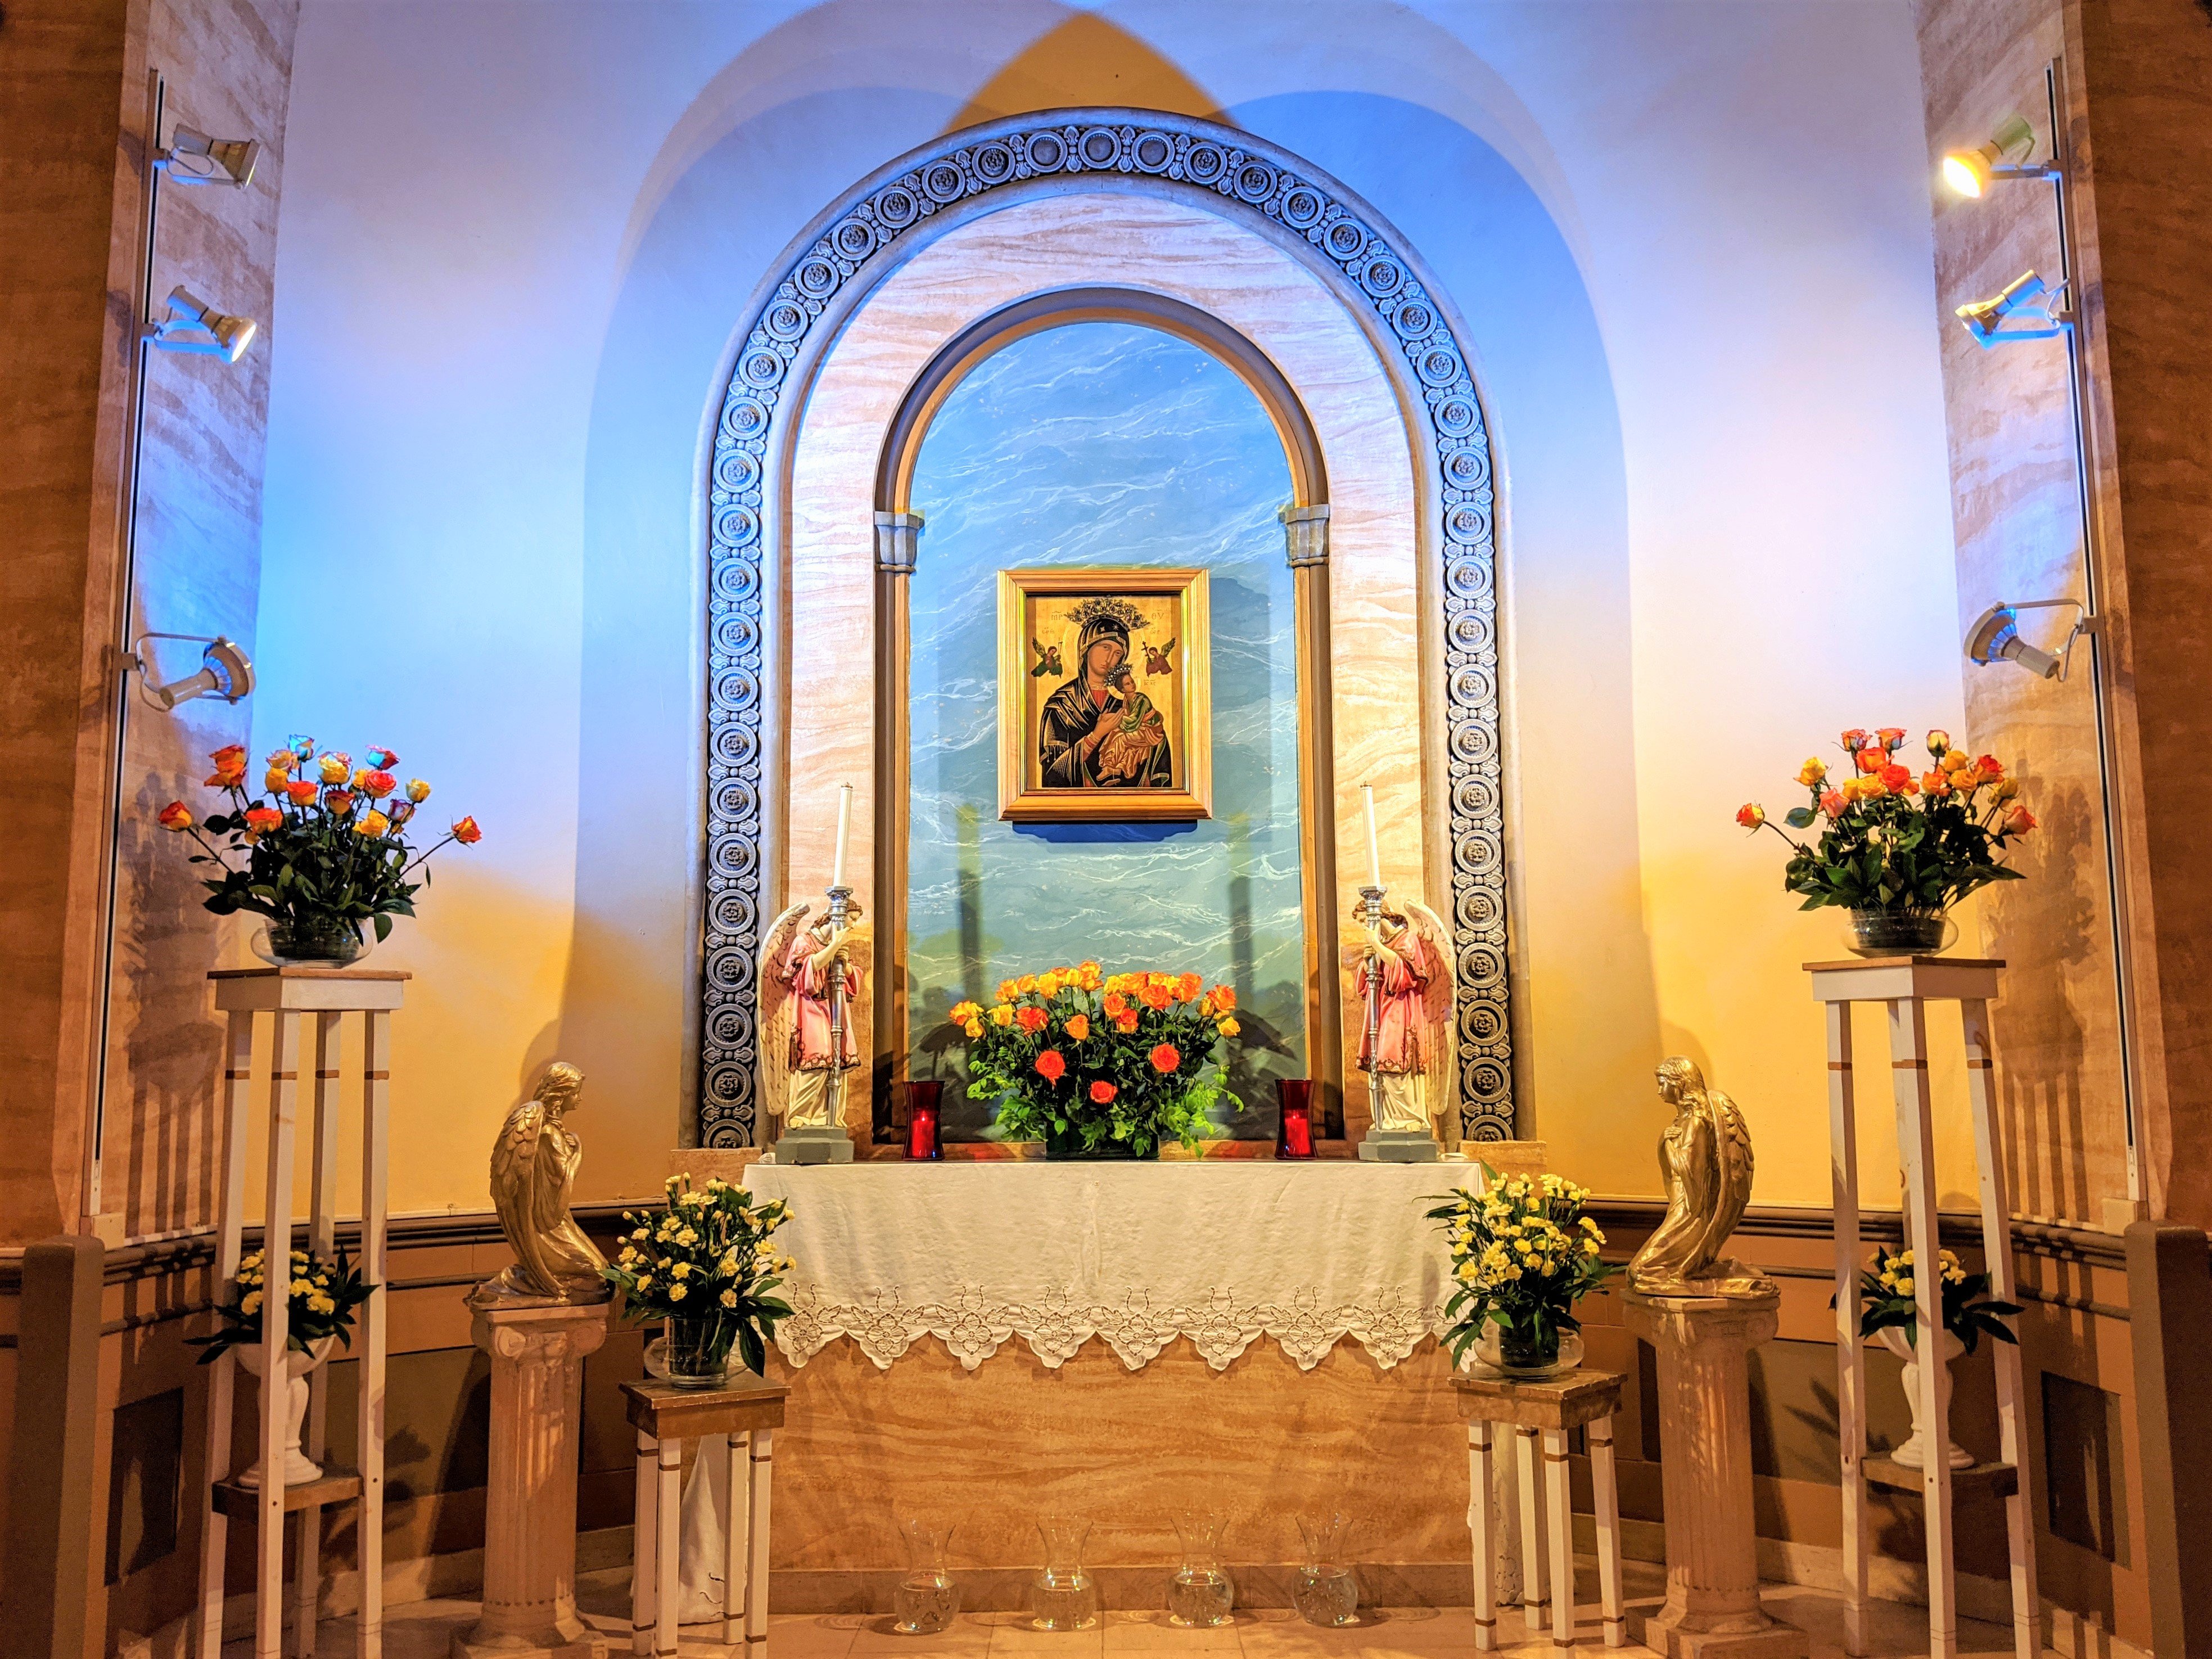 St. Patrick's Parish is the National Shrine for Our Lady of Perpetual Help in Toronto.